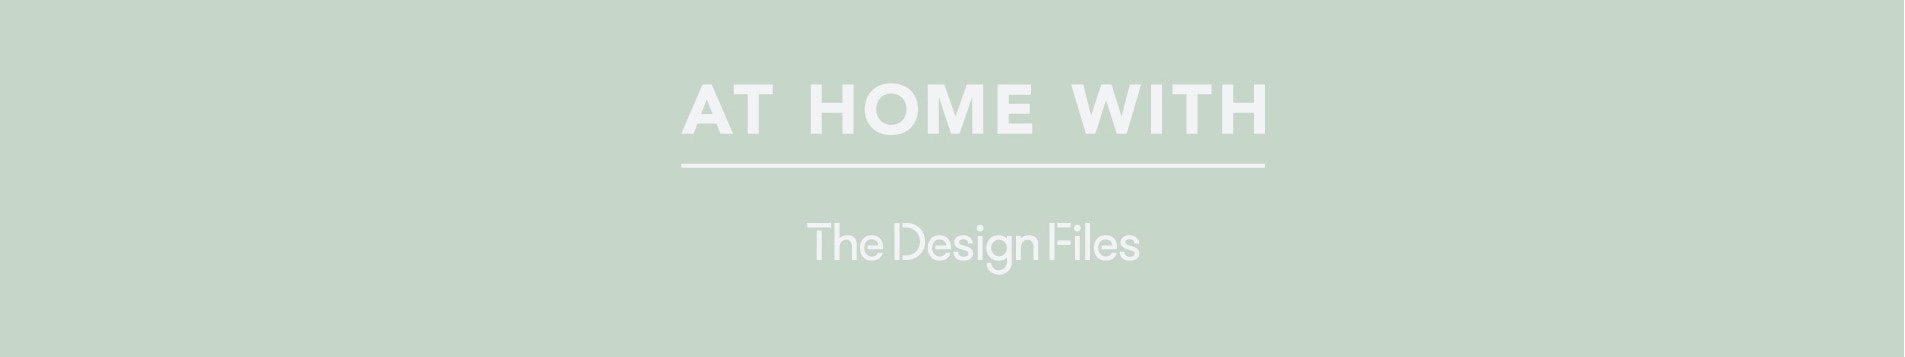 mint green banner with the words "at home with the design files" in the centre